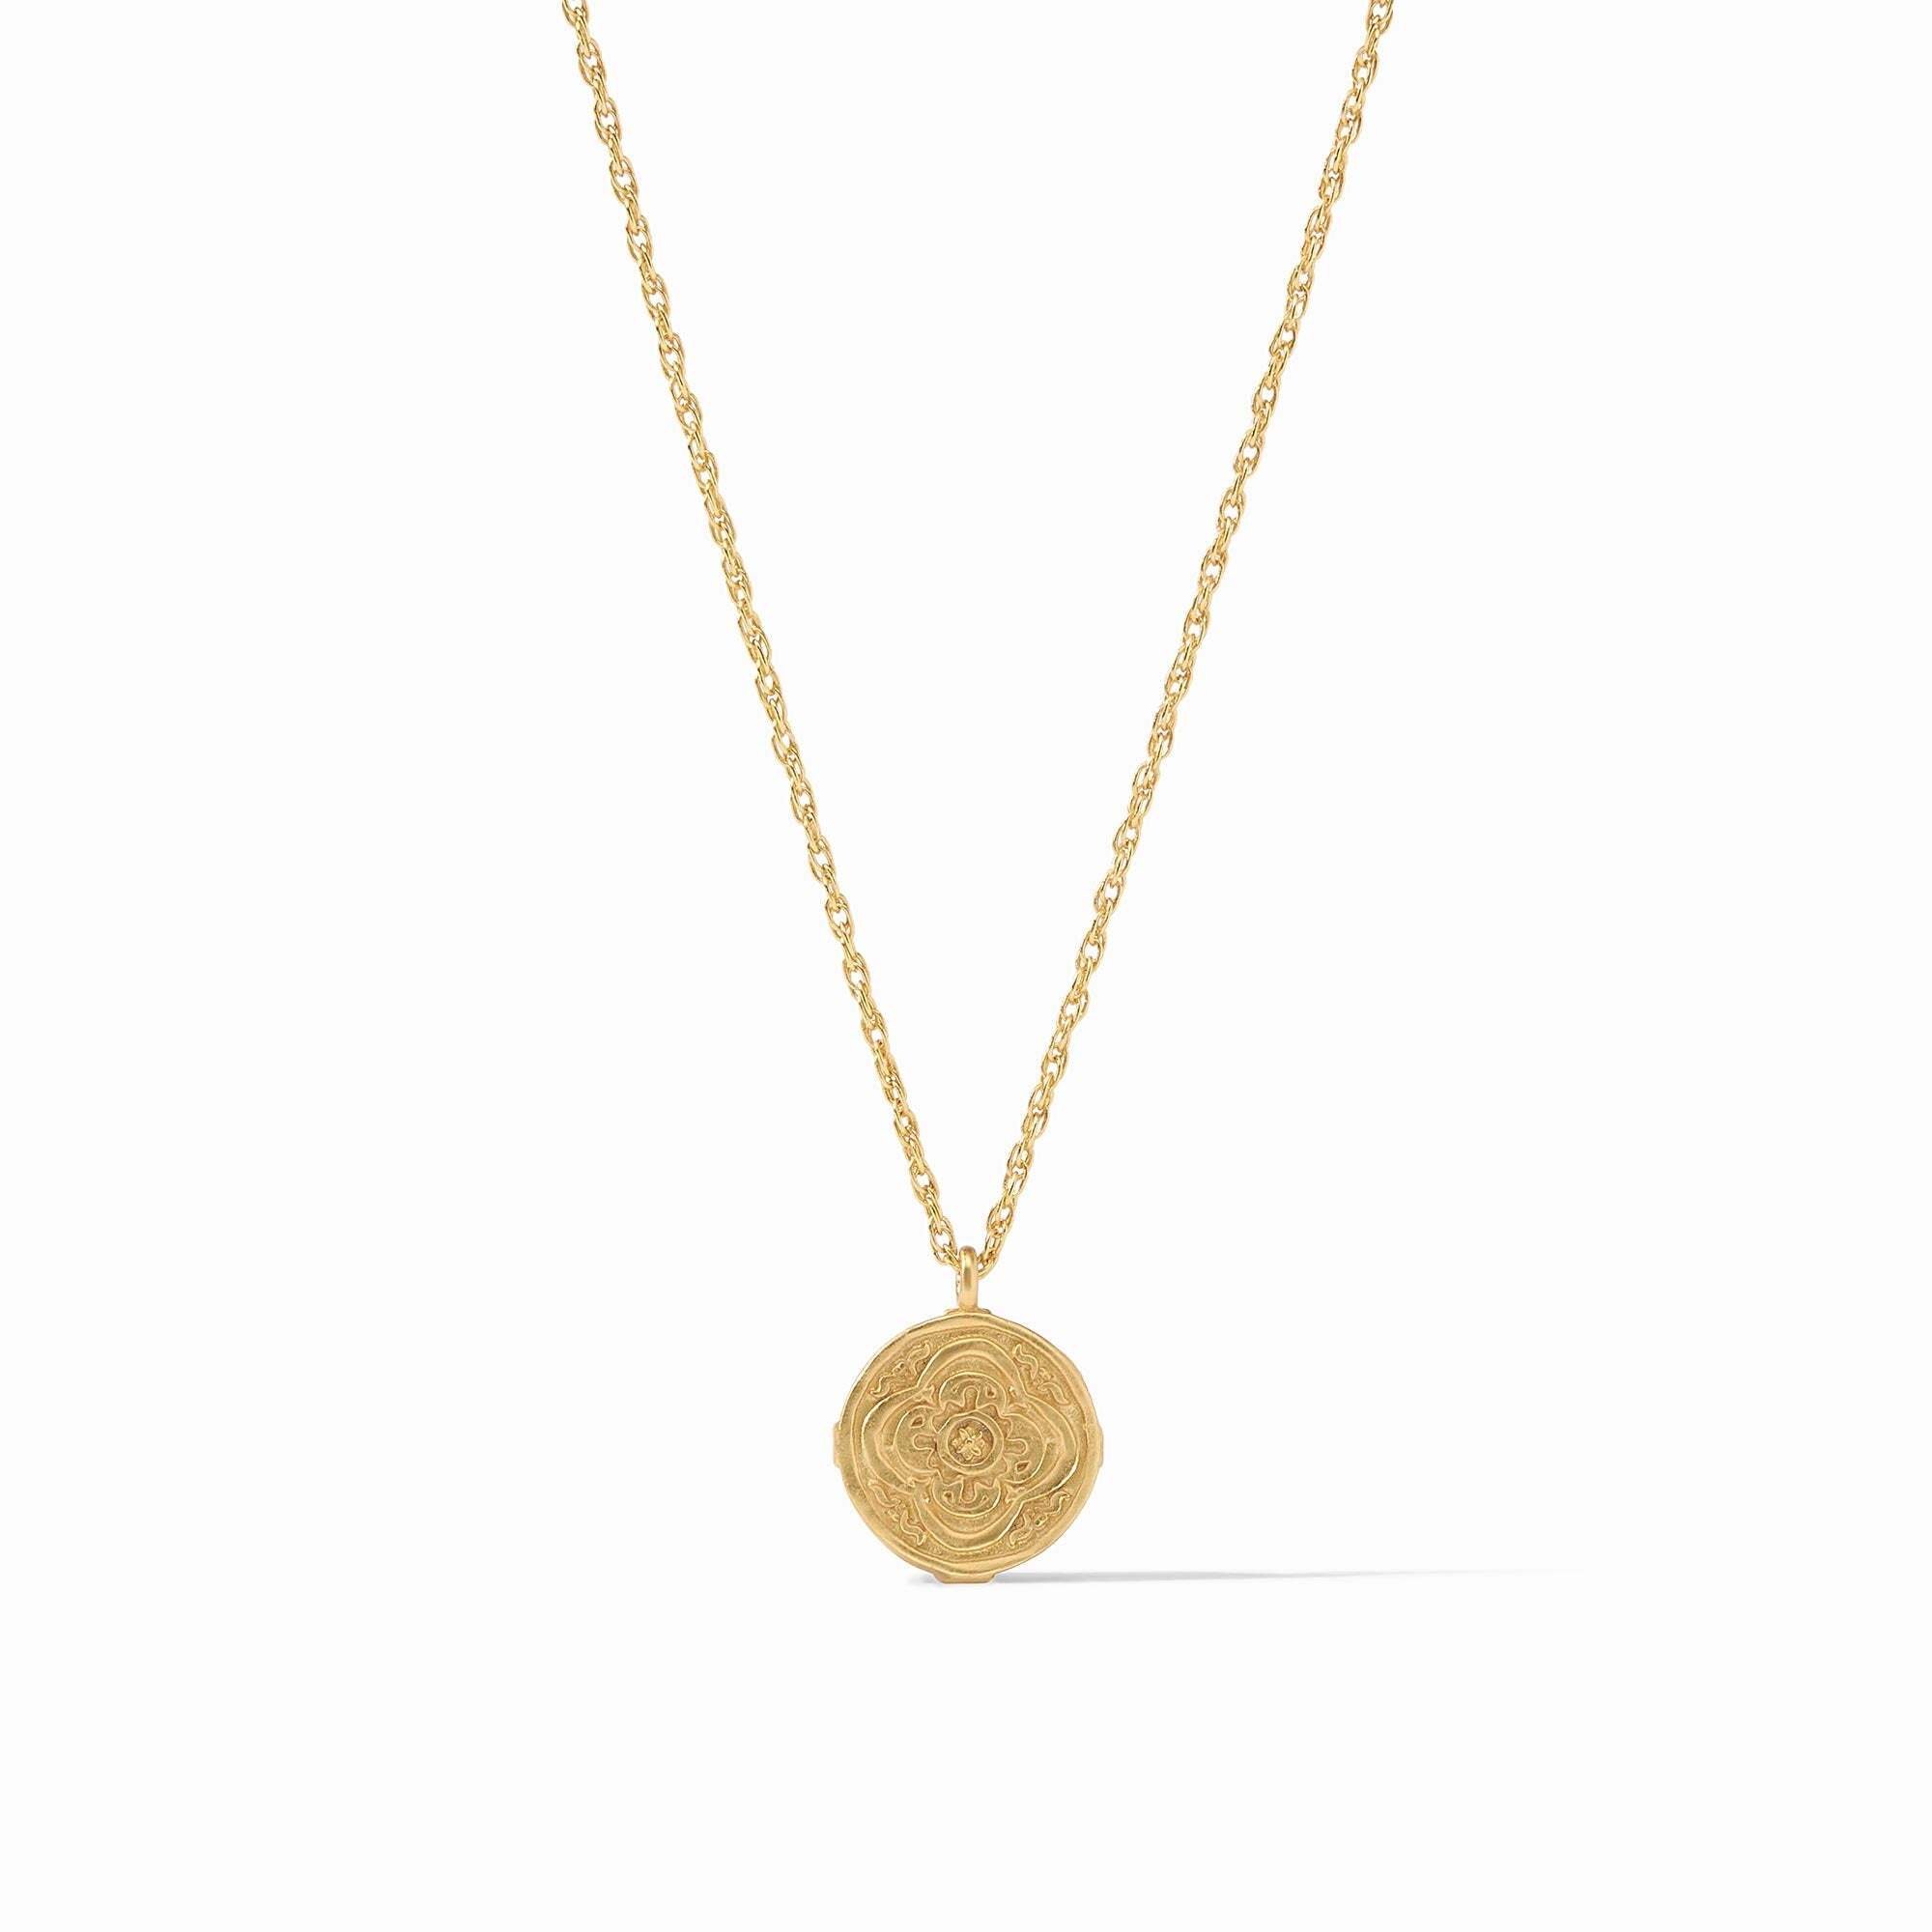 Astor Solitaire Necklace